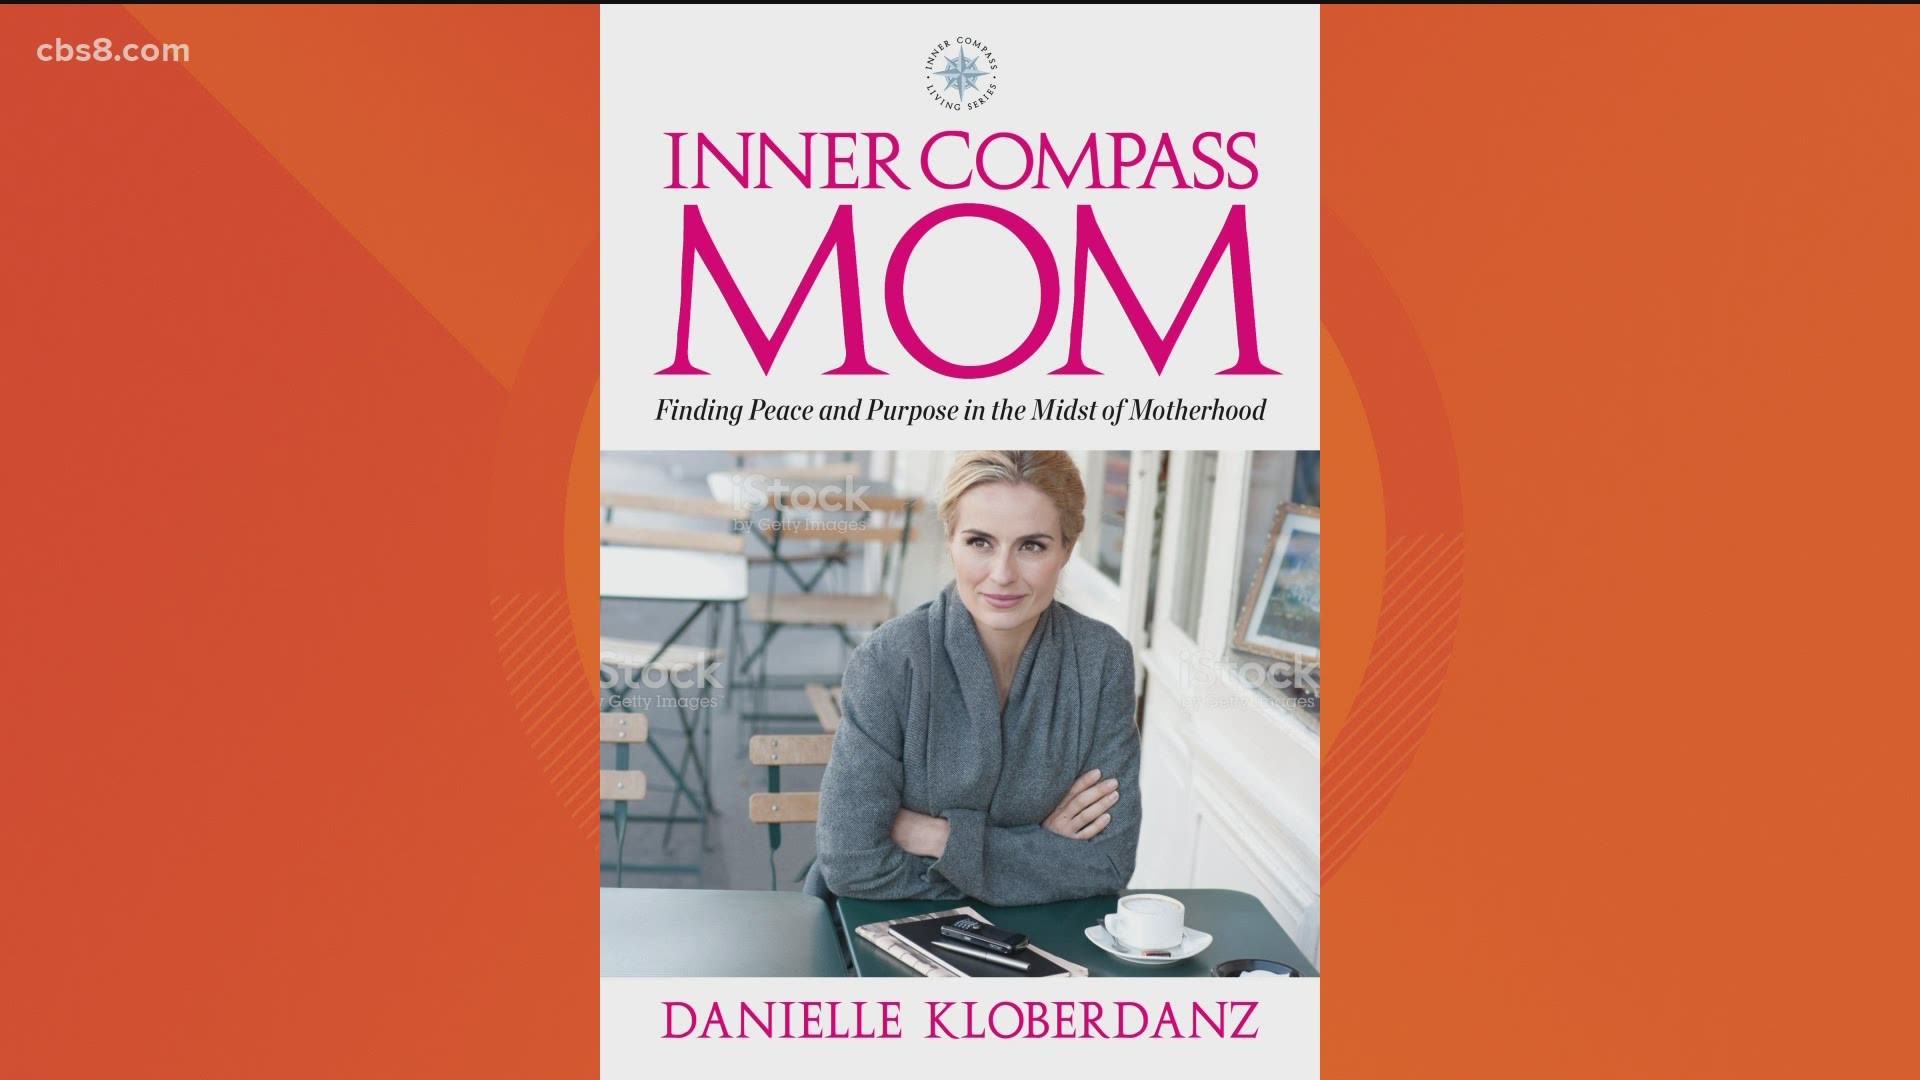 Author Danielle Kloberdanz joined the show to talk about her book Inner Compass Mom: Finding Peace and Purpose in the Midst of Motherhood.